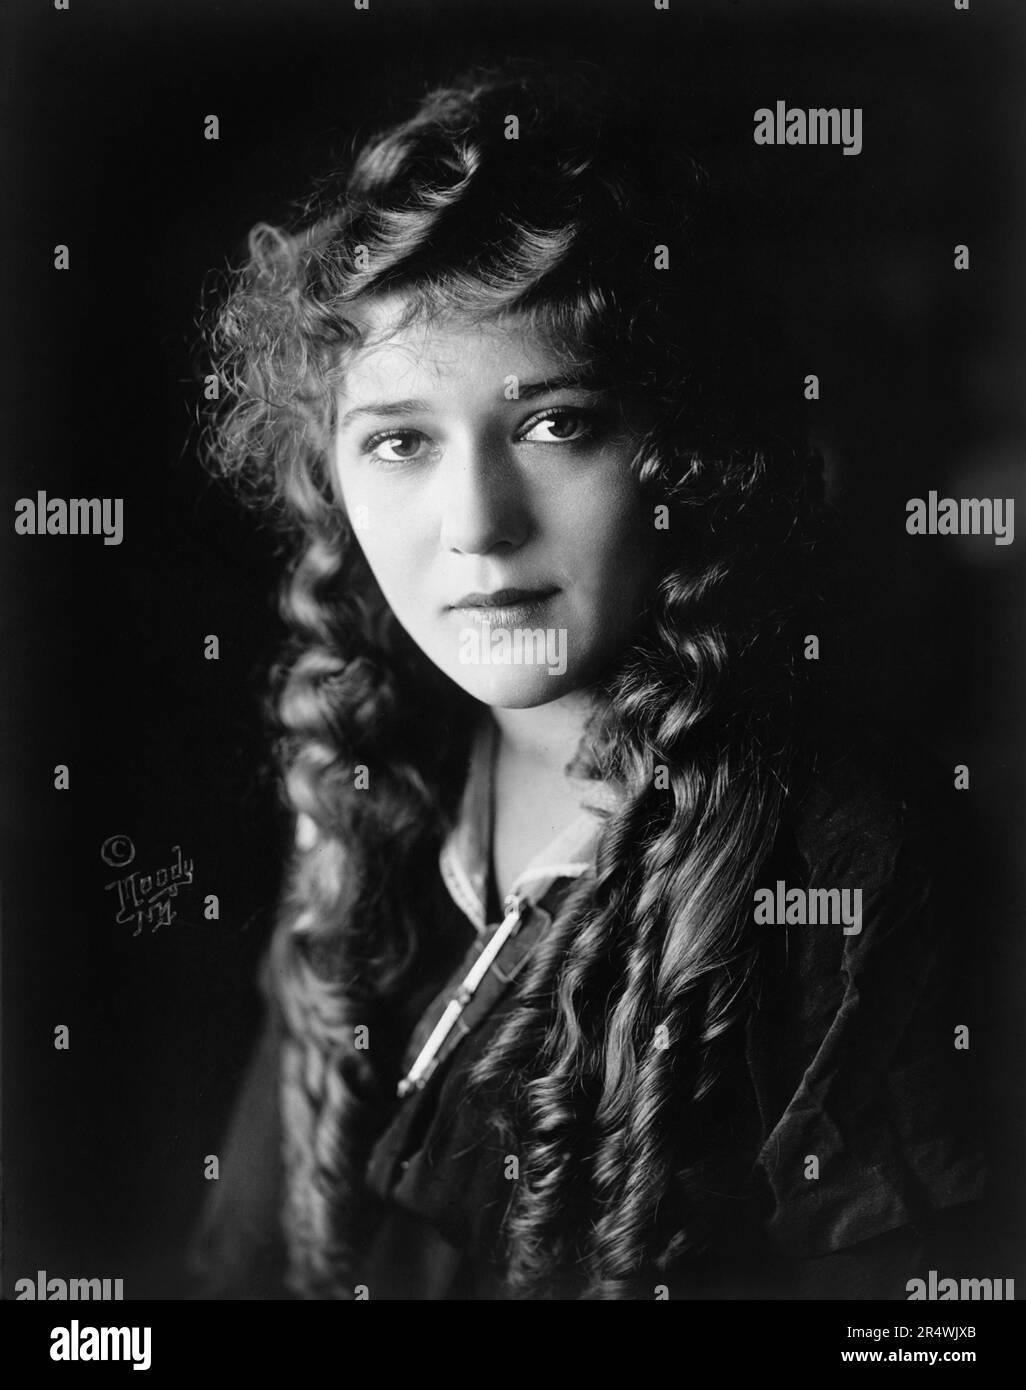 Photograph of Mary Pickford (1892-1979) Canadian-American motion picture actress, co-founder of the film studio United Artists and one of the original 36 founders of the Academy of Motion Picture Arts and Sciences. Dated 1930 Stock Photo